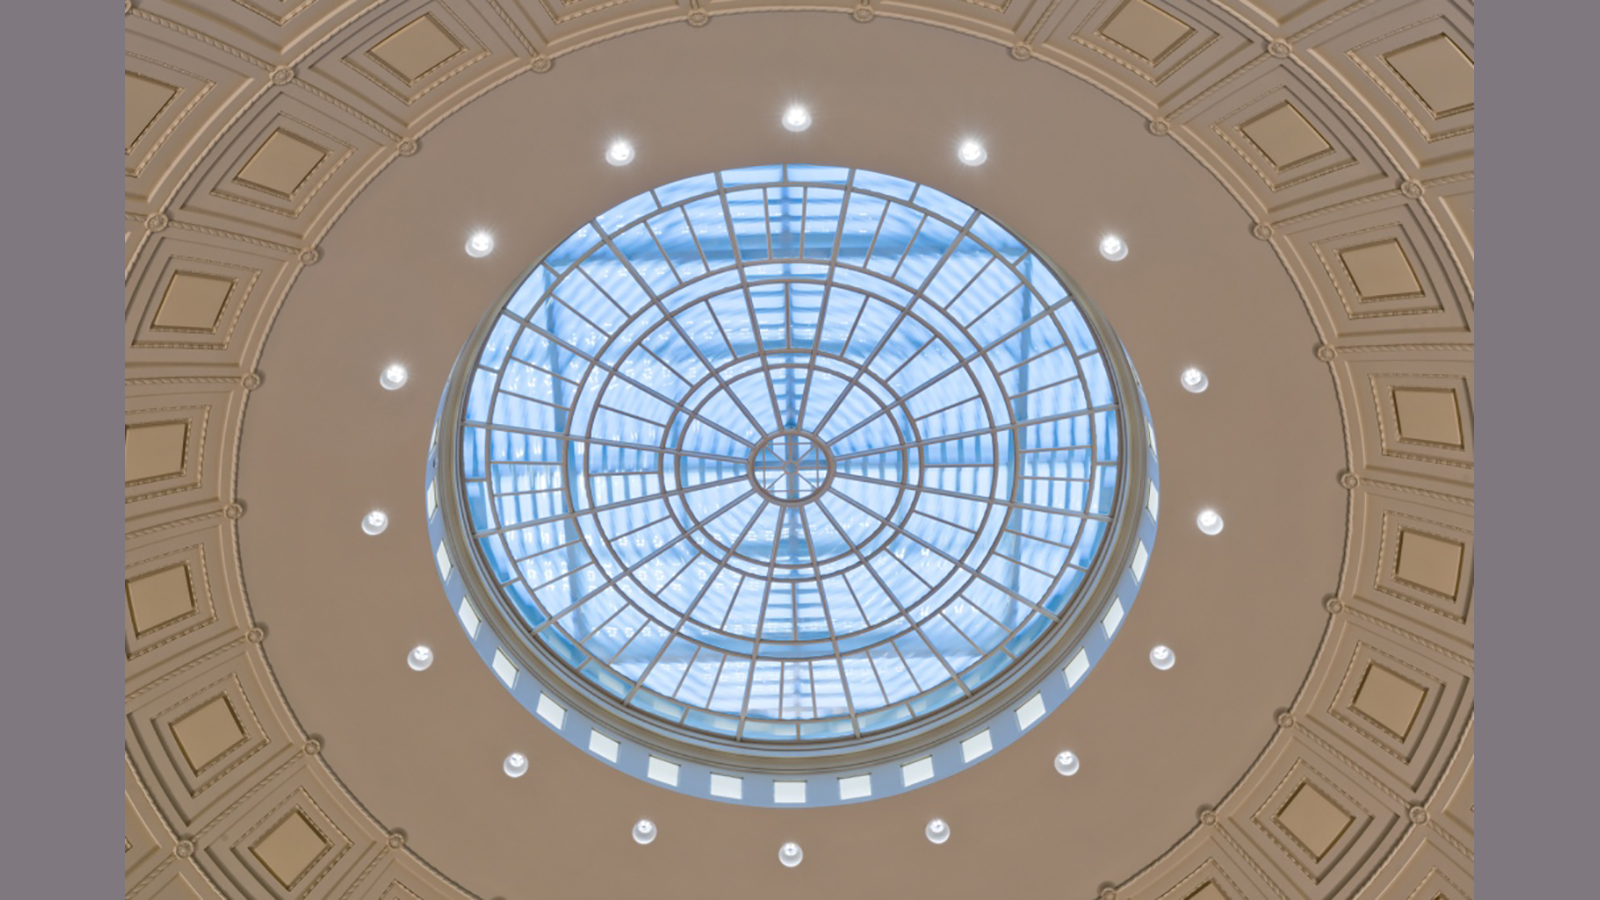 MIT Barker Engineering Library Dome